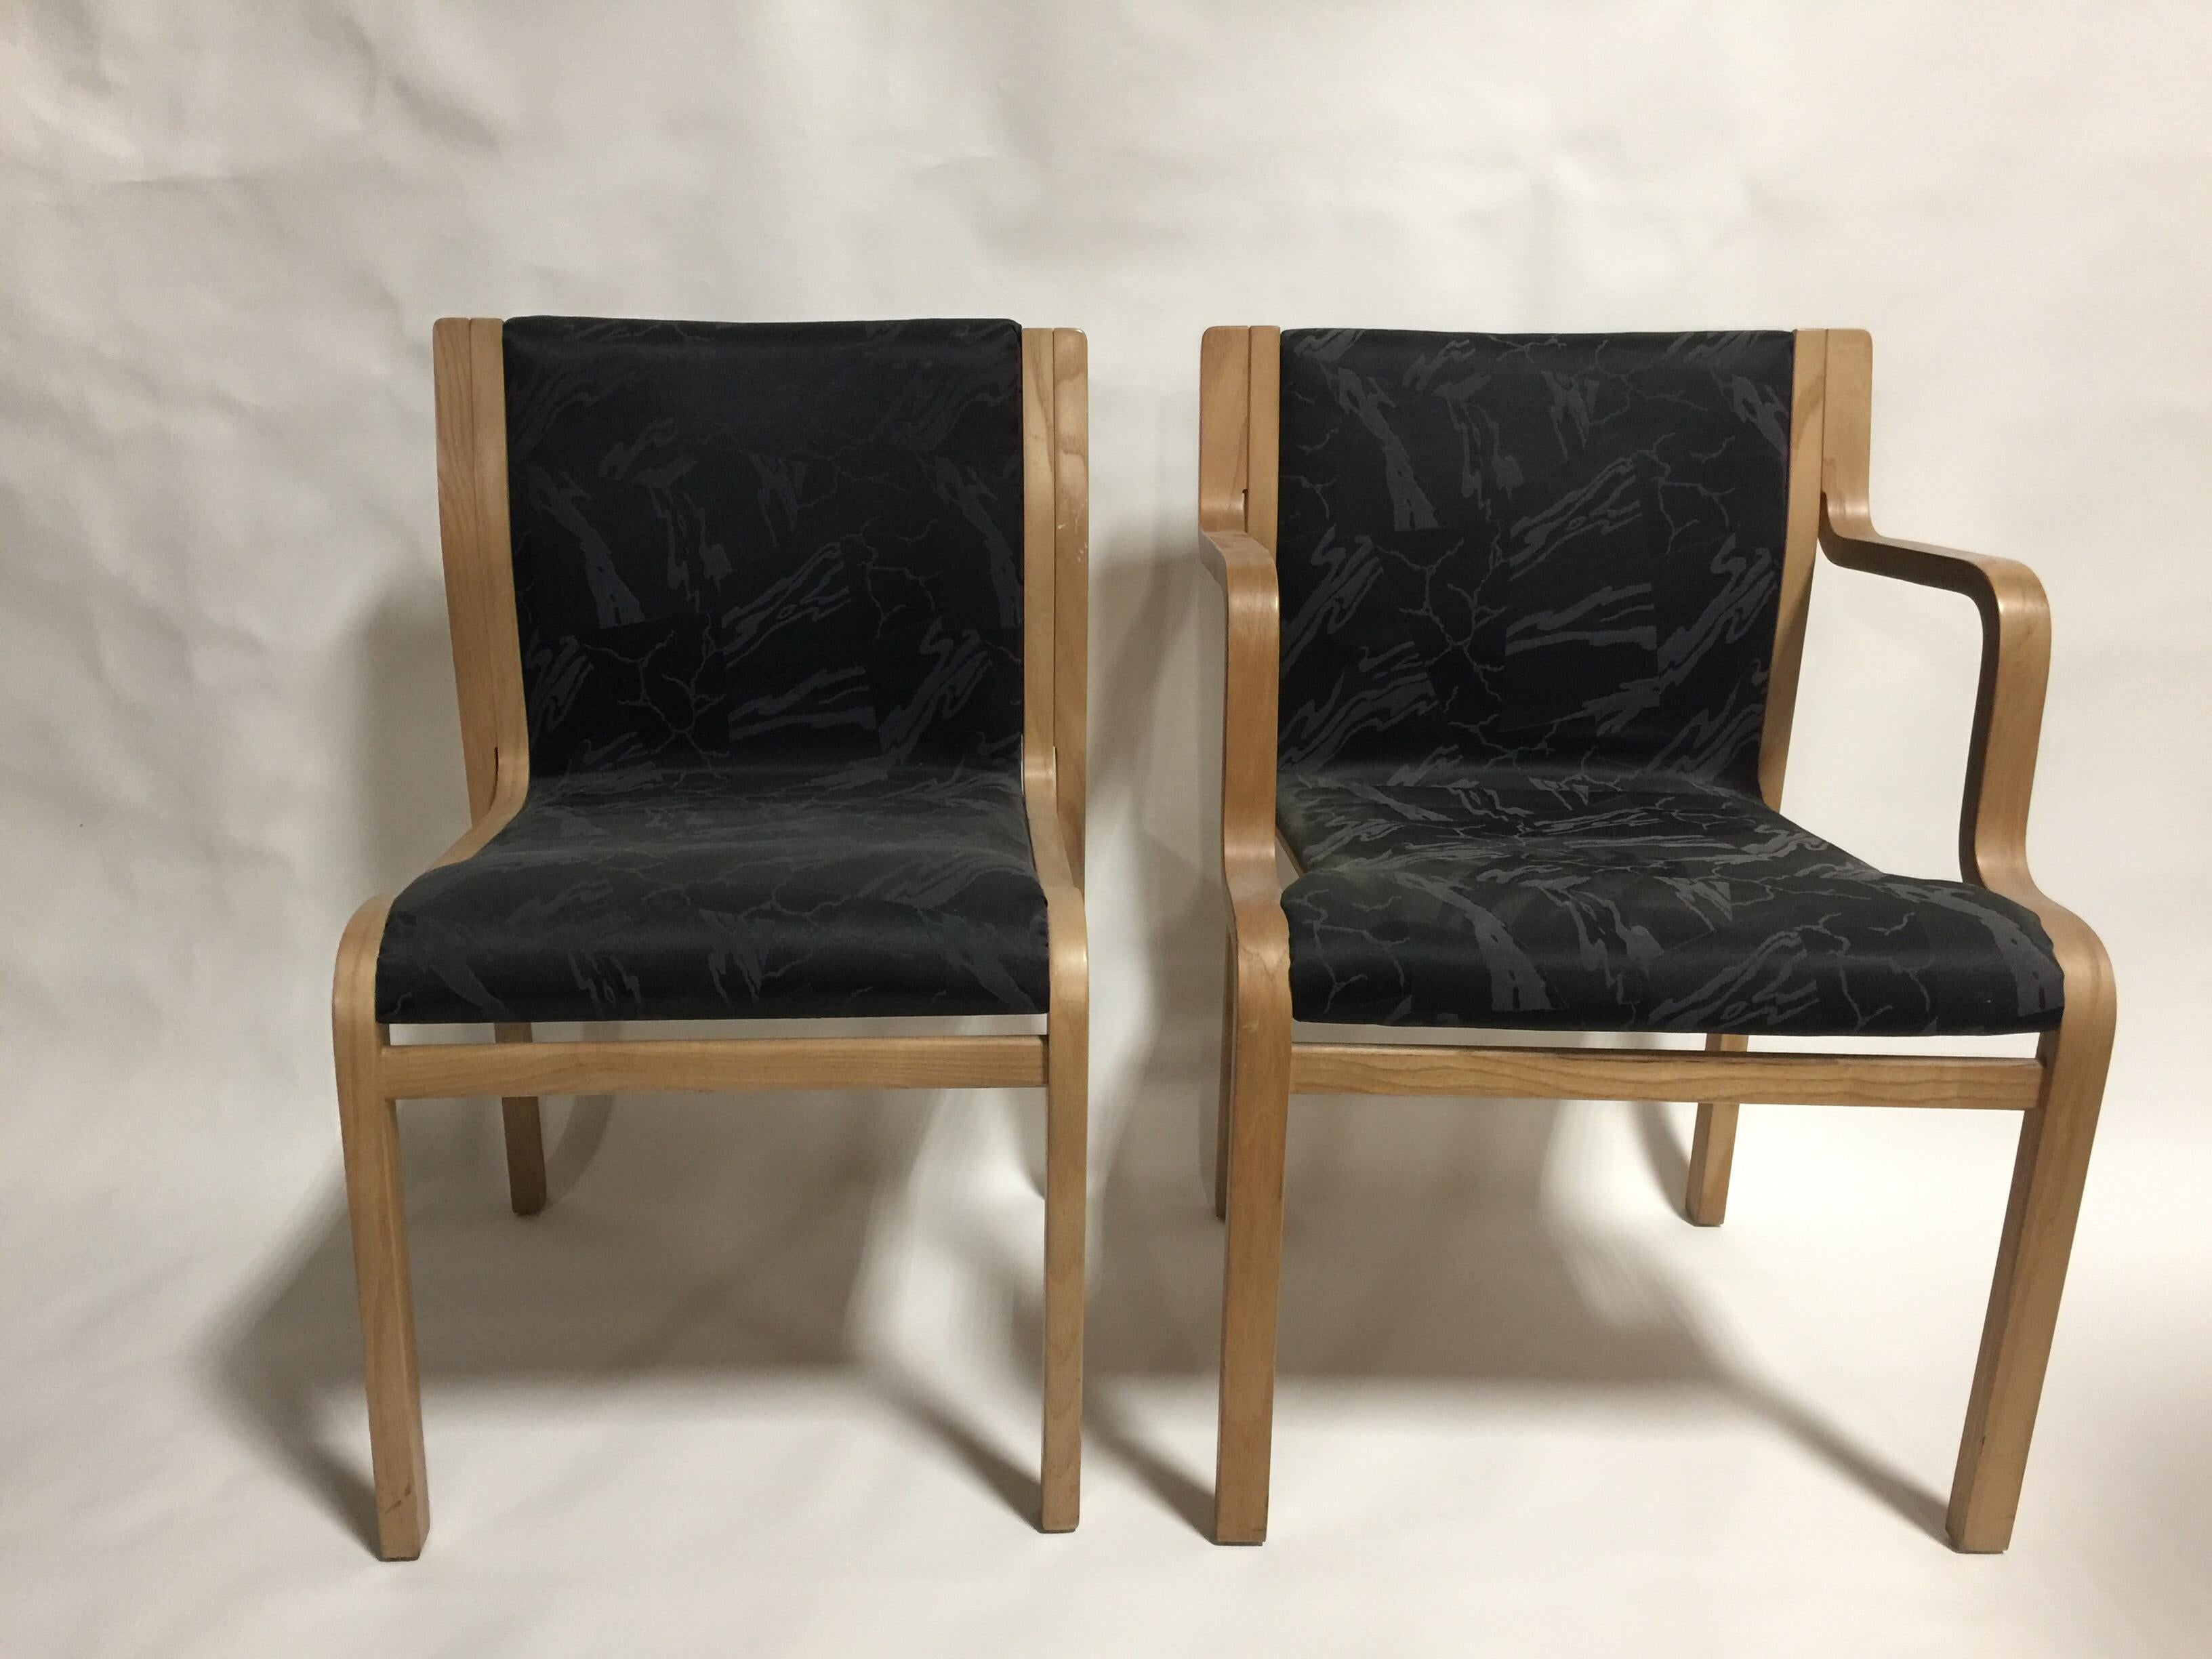 A set of six (6) of bentwood dining or conference room chairs in a black jacquard fabric. Designed by Bill Stephen for Knoll in the 1970s. Made in the USA. Unsigned, but widely documented.

Includes 2 armchairs and 4 side chairs.

Original